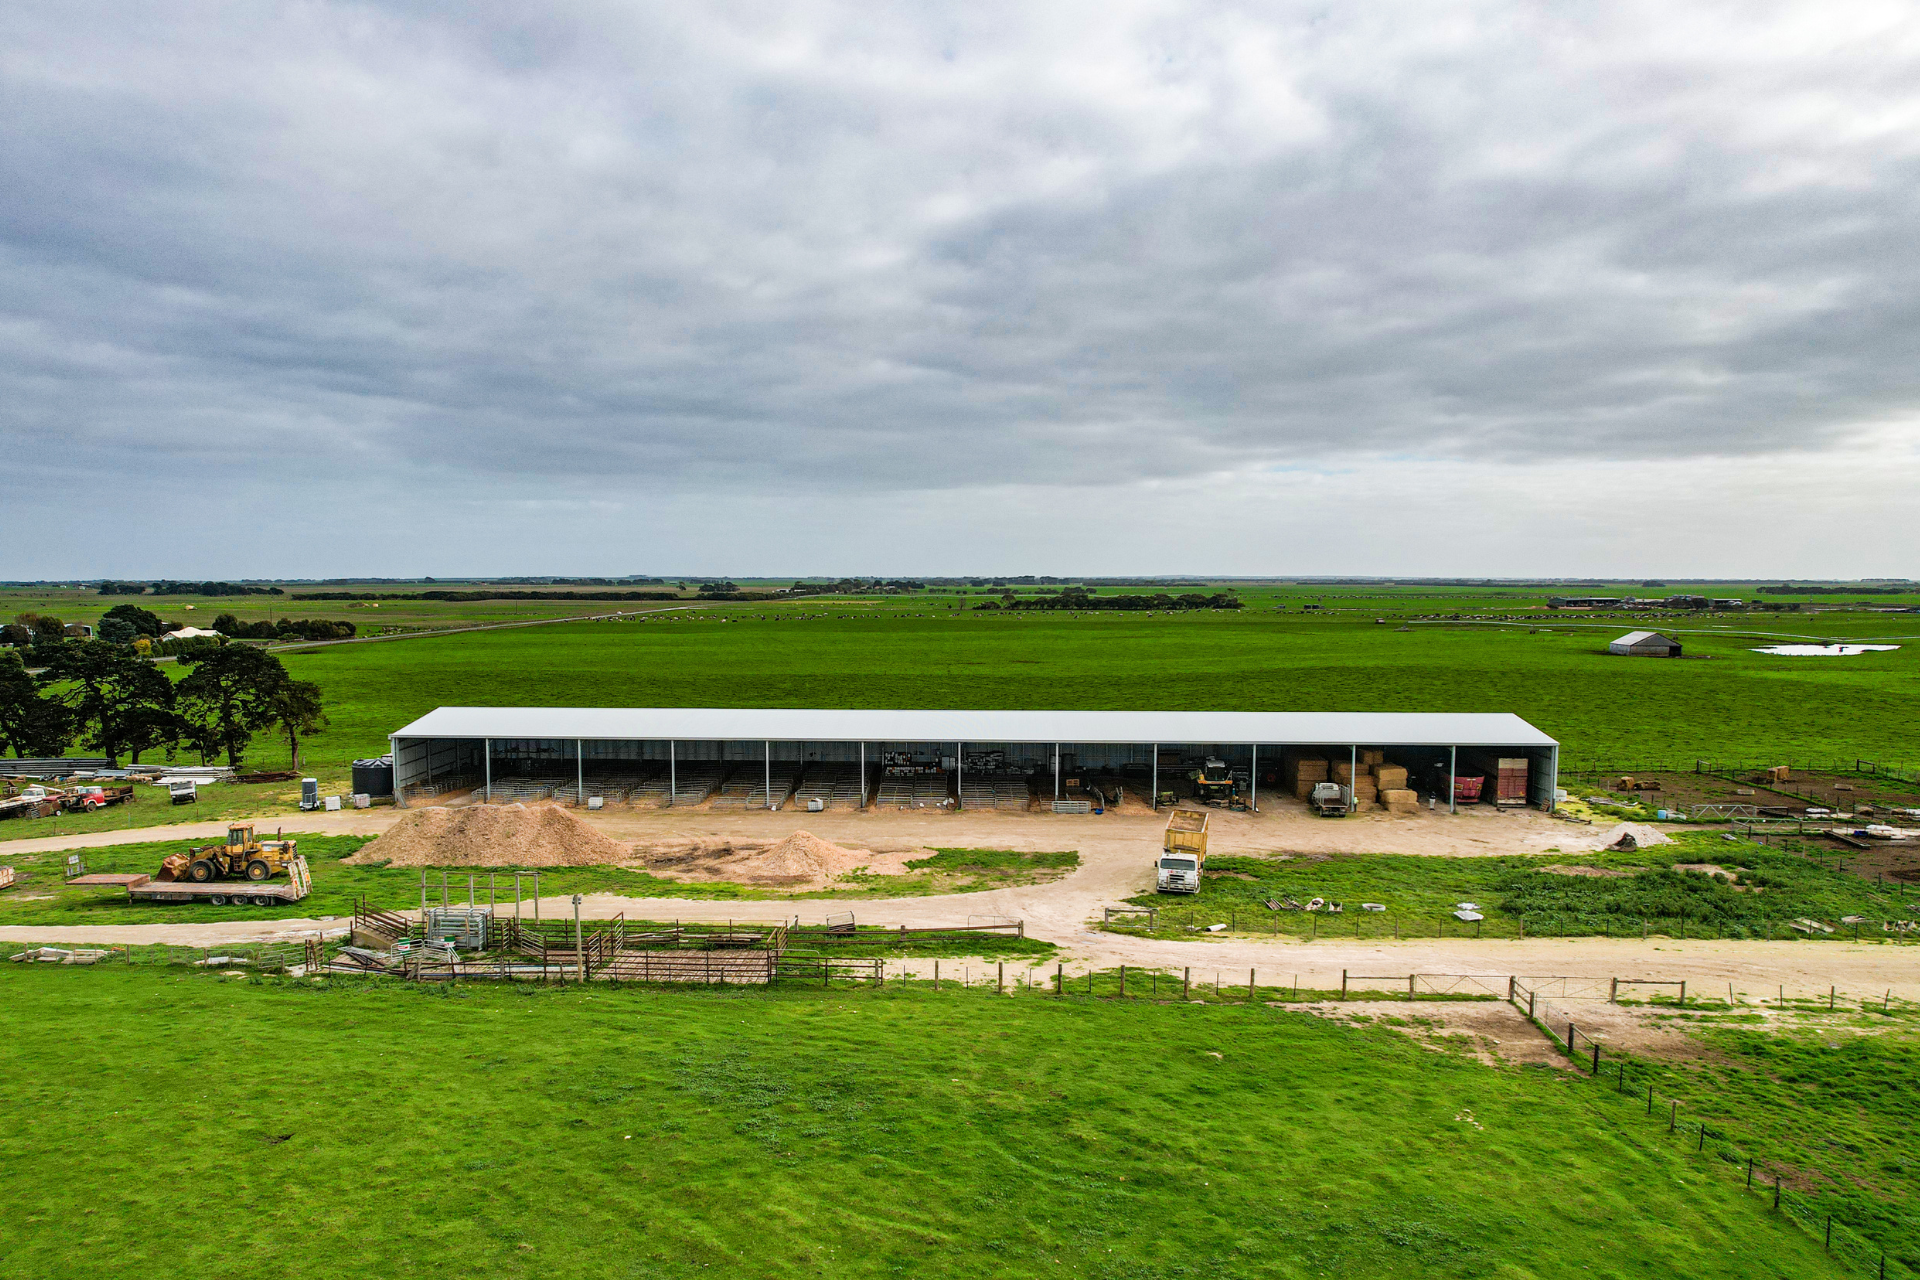 You are currently viewing 102m x 21m x 6m calf shed